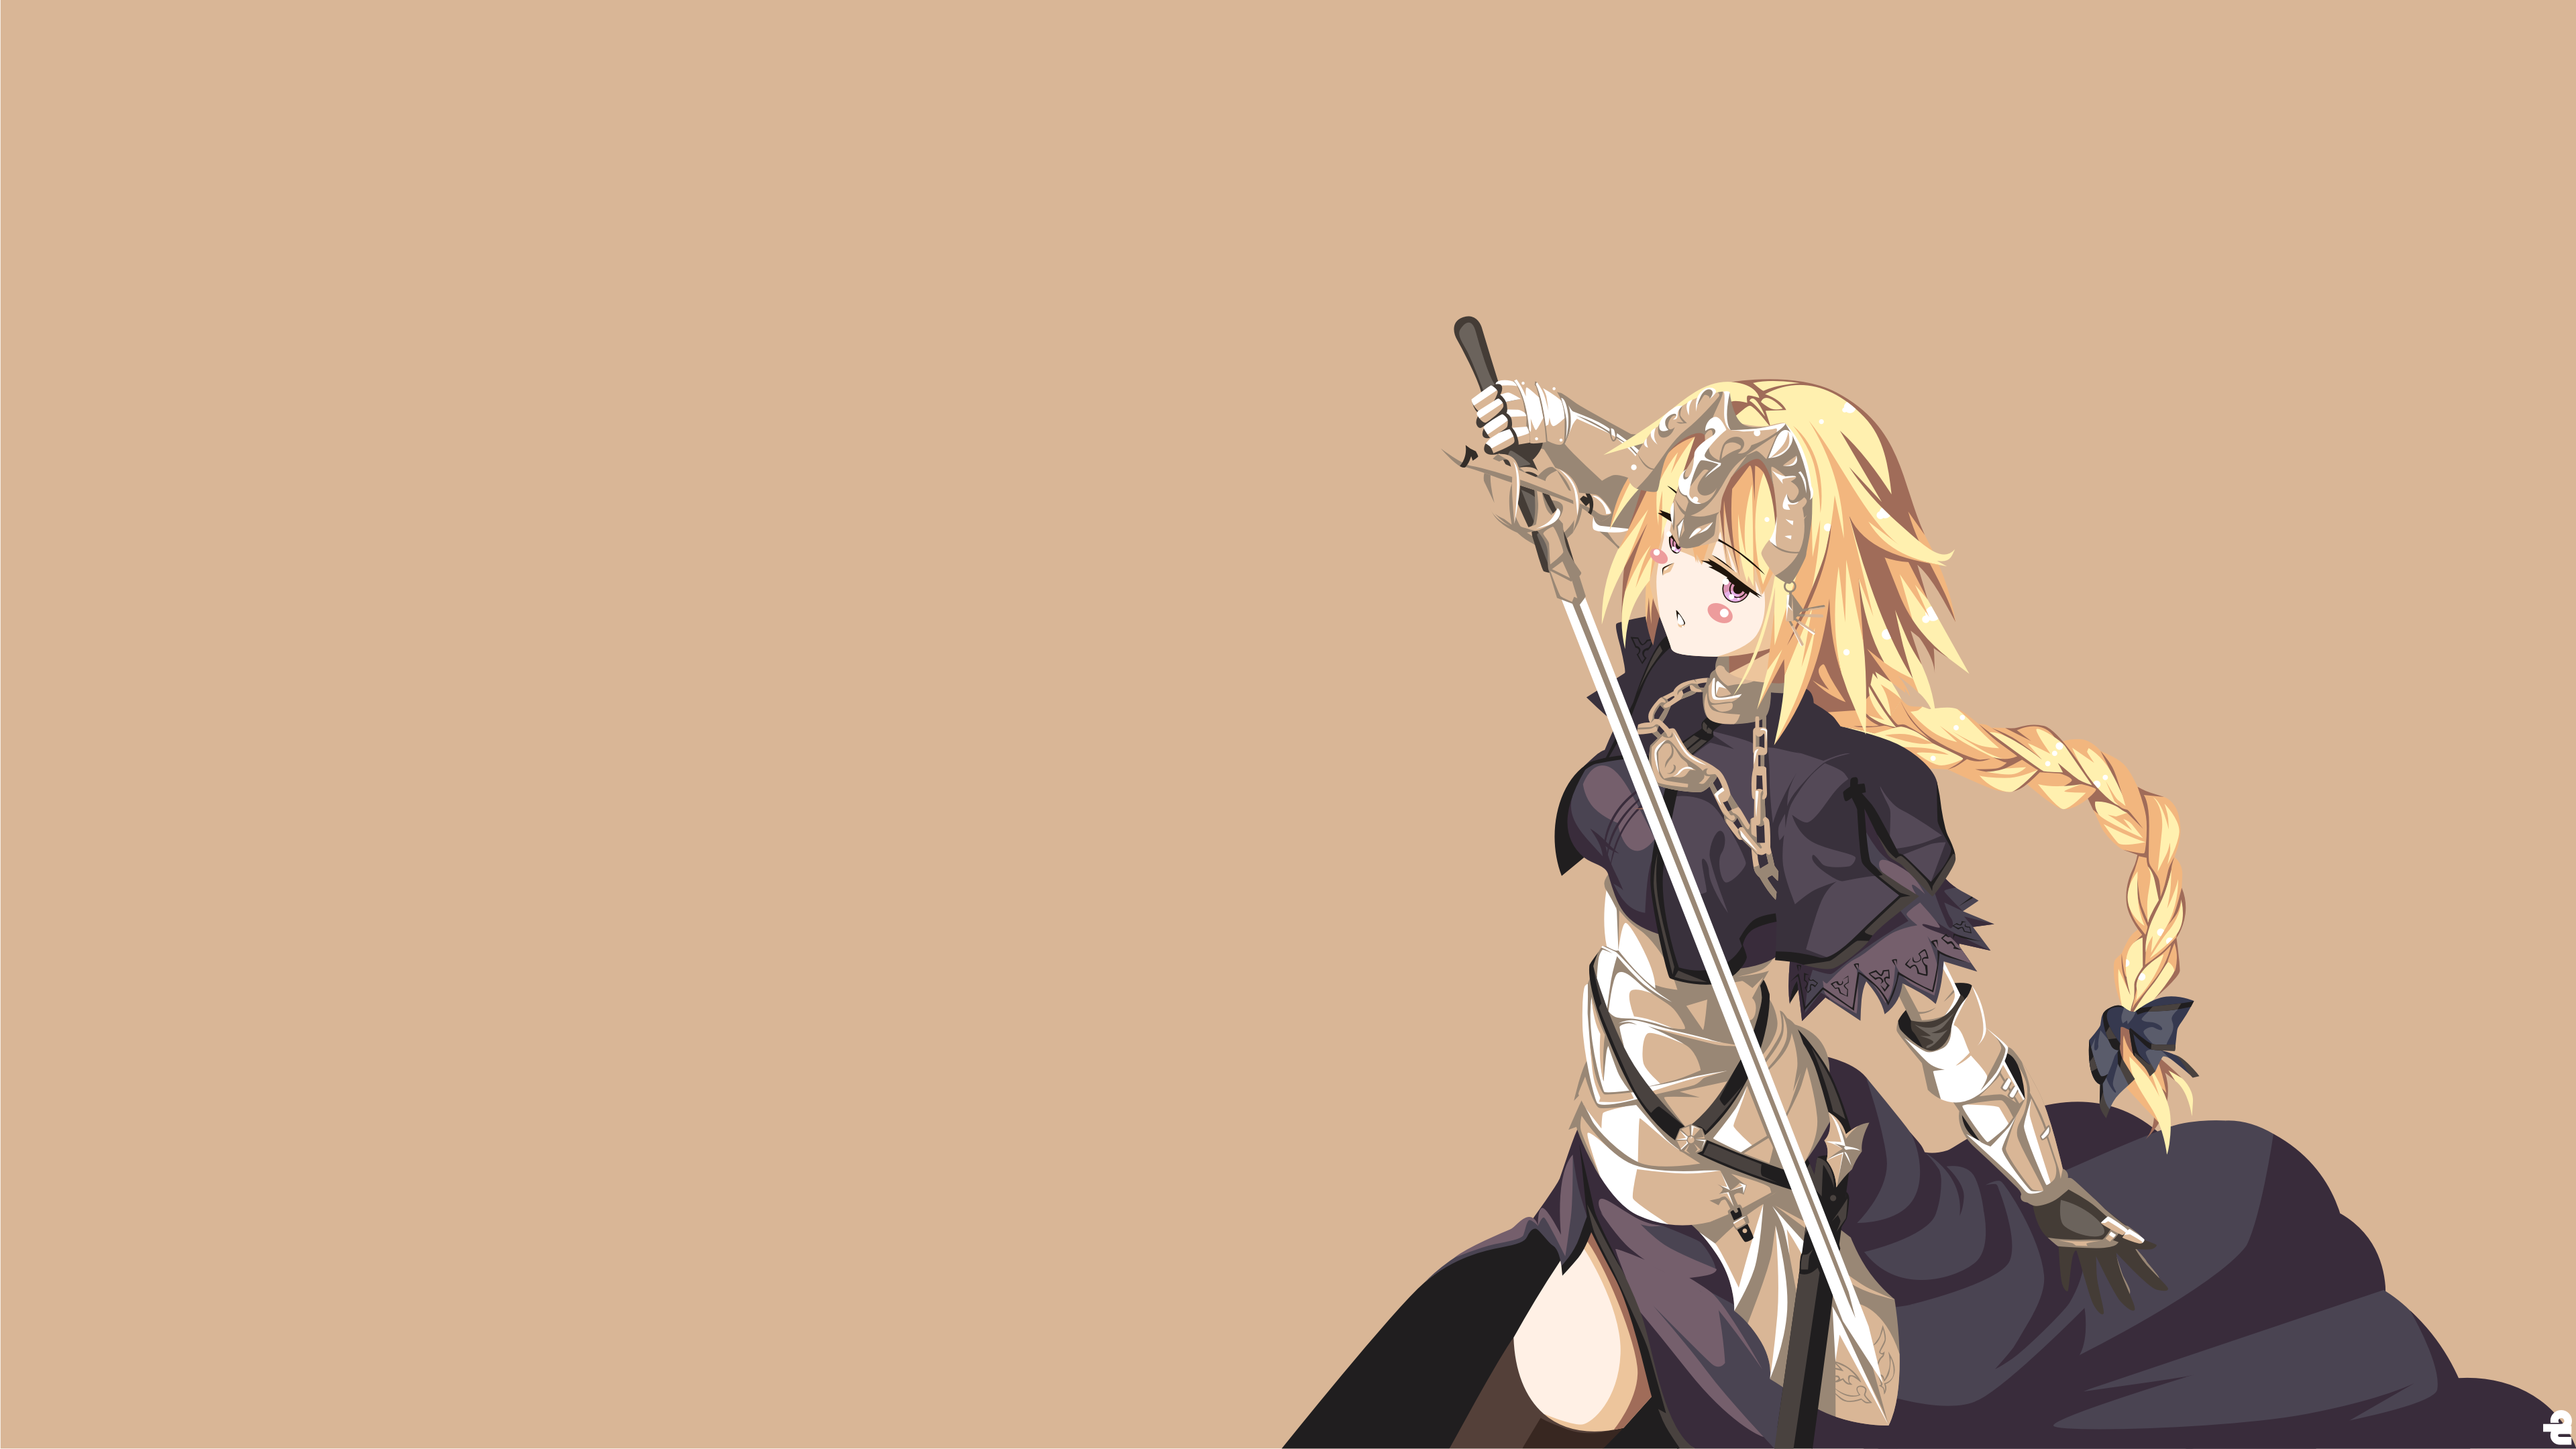 Anime 3840x2160 Fate/Apocrypha  anime girls minimalism Fate/Grand Order Fate series simple background thighs big boobs black stockings 2D bangs anime zettai ryouiki hair in face purple eyes blushing armored woman Jeanne d'Arc (Fate) Ruler (Fate/Apocrypha) gauntlets long hair fan art noerulb blonde